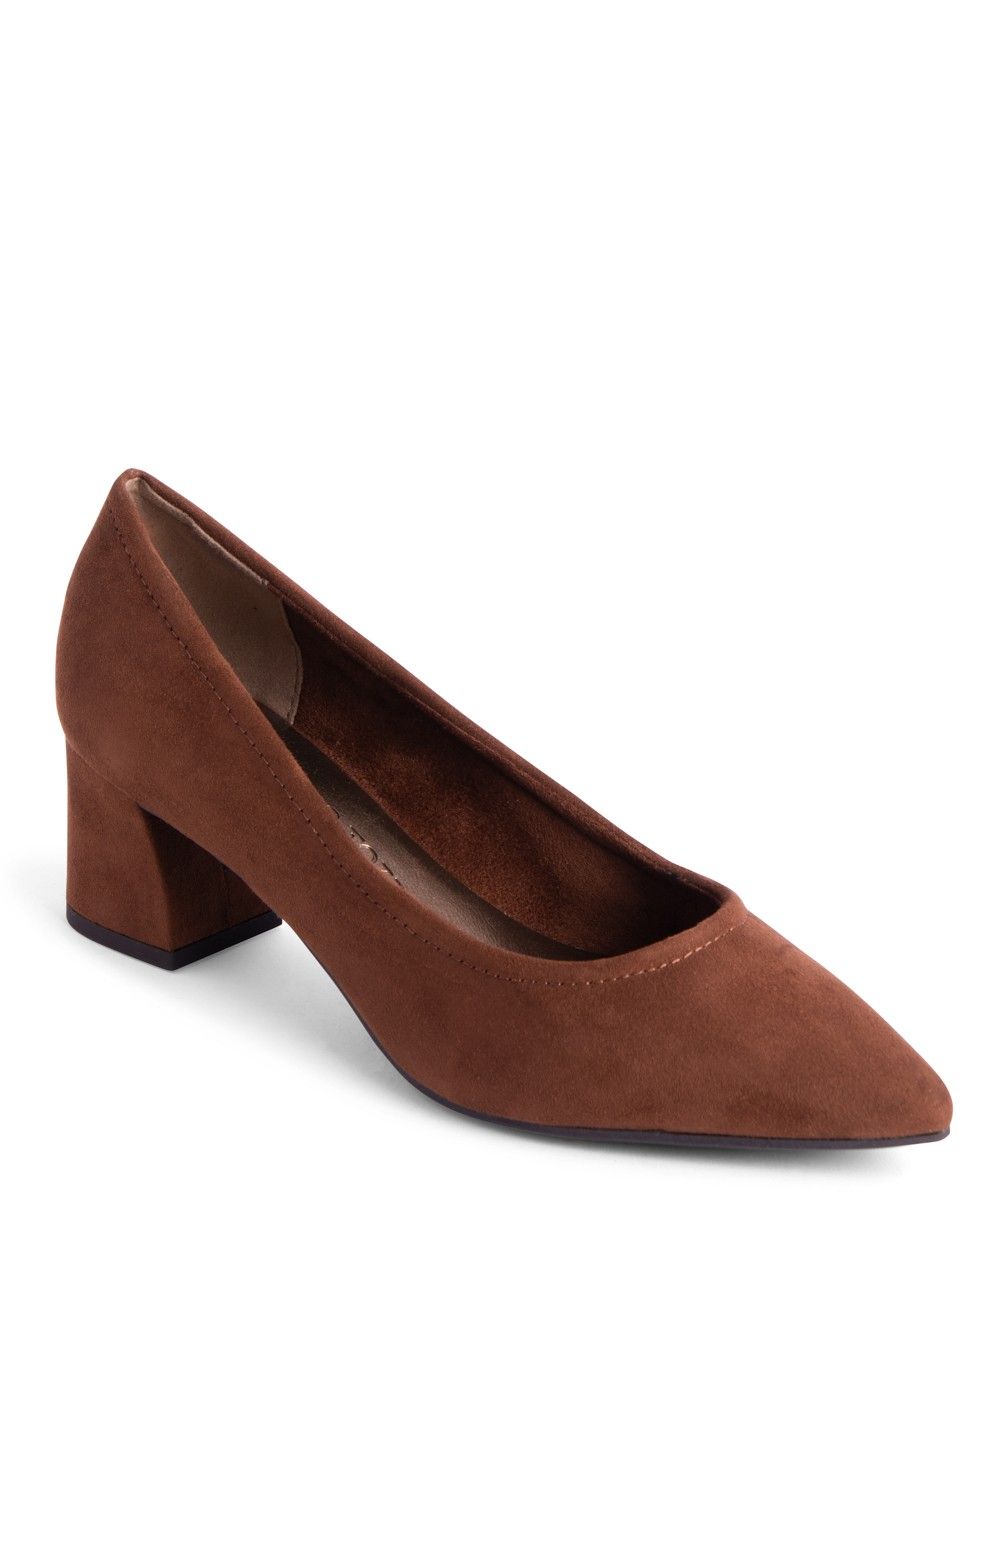 Ladies Marco Tozzi Suede Court Shoe | The House Of Bruar